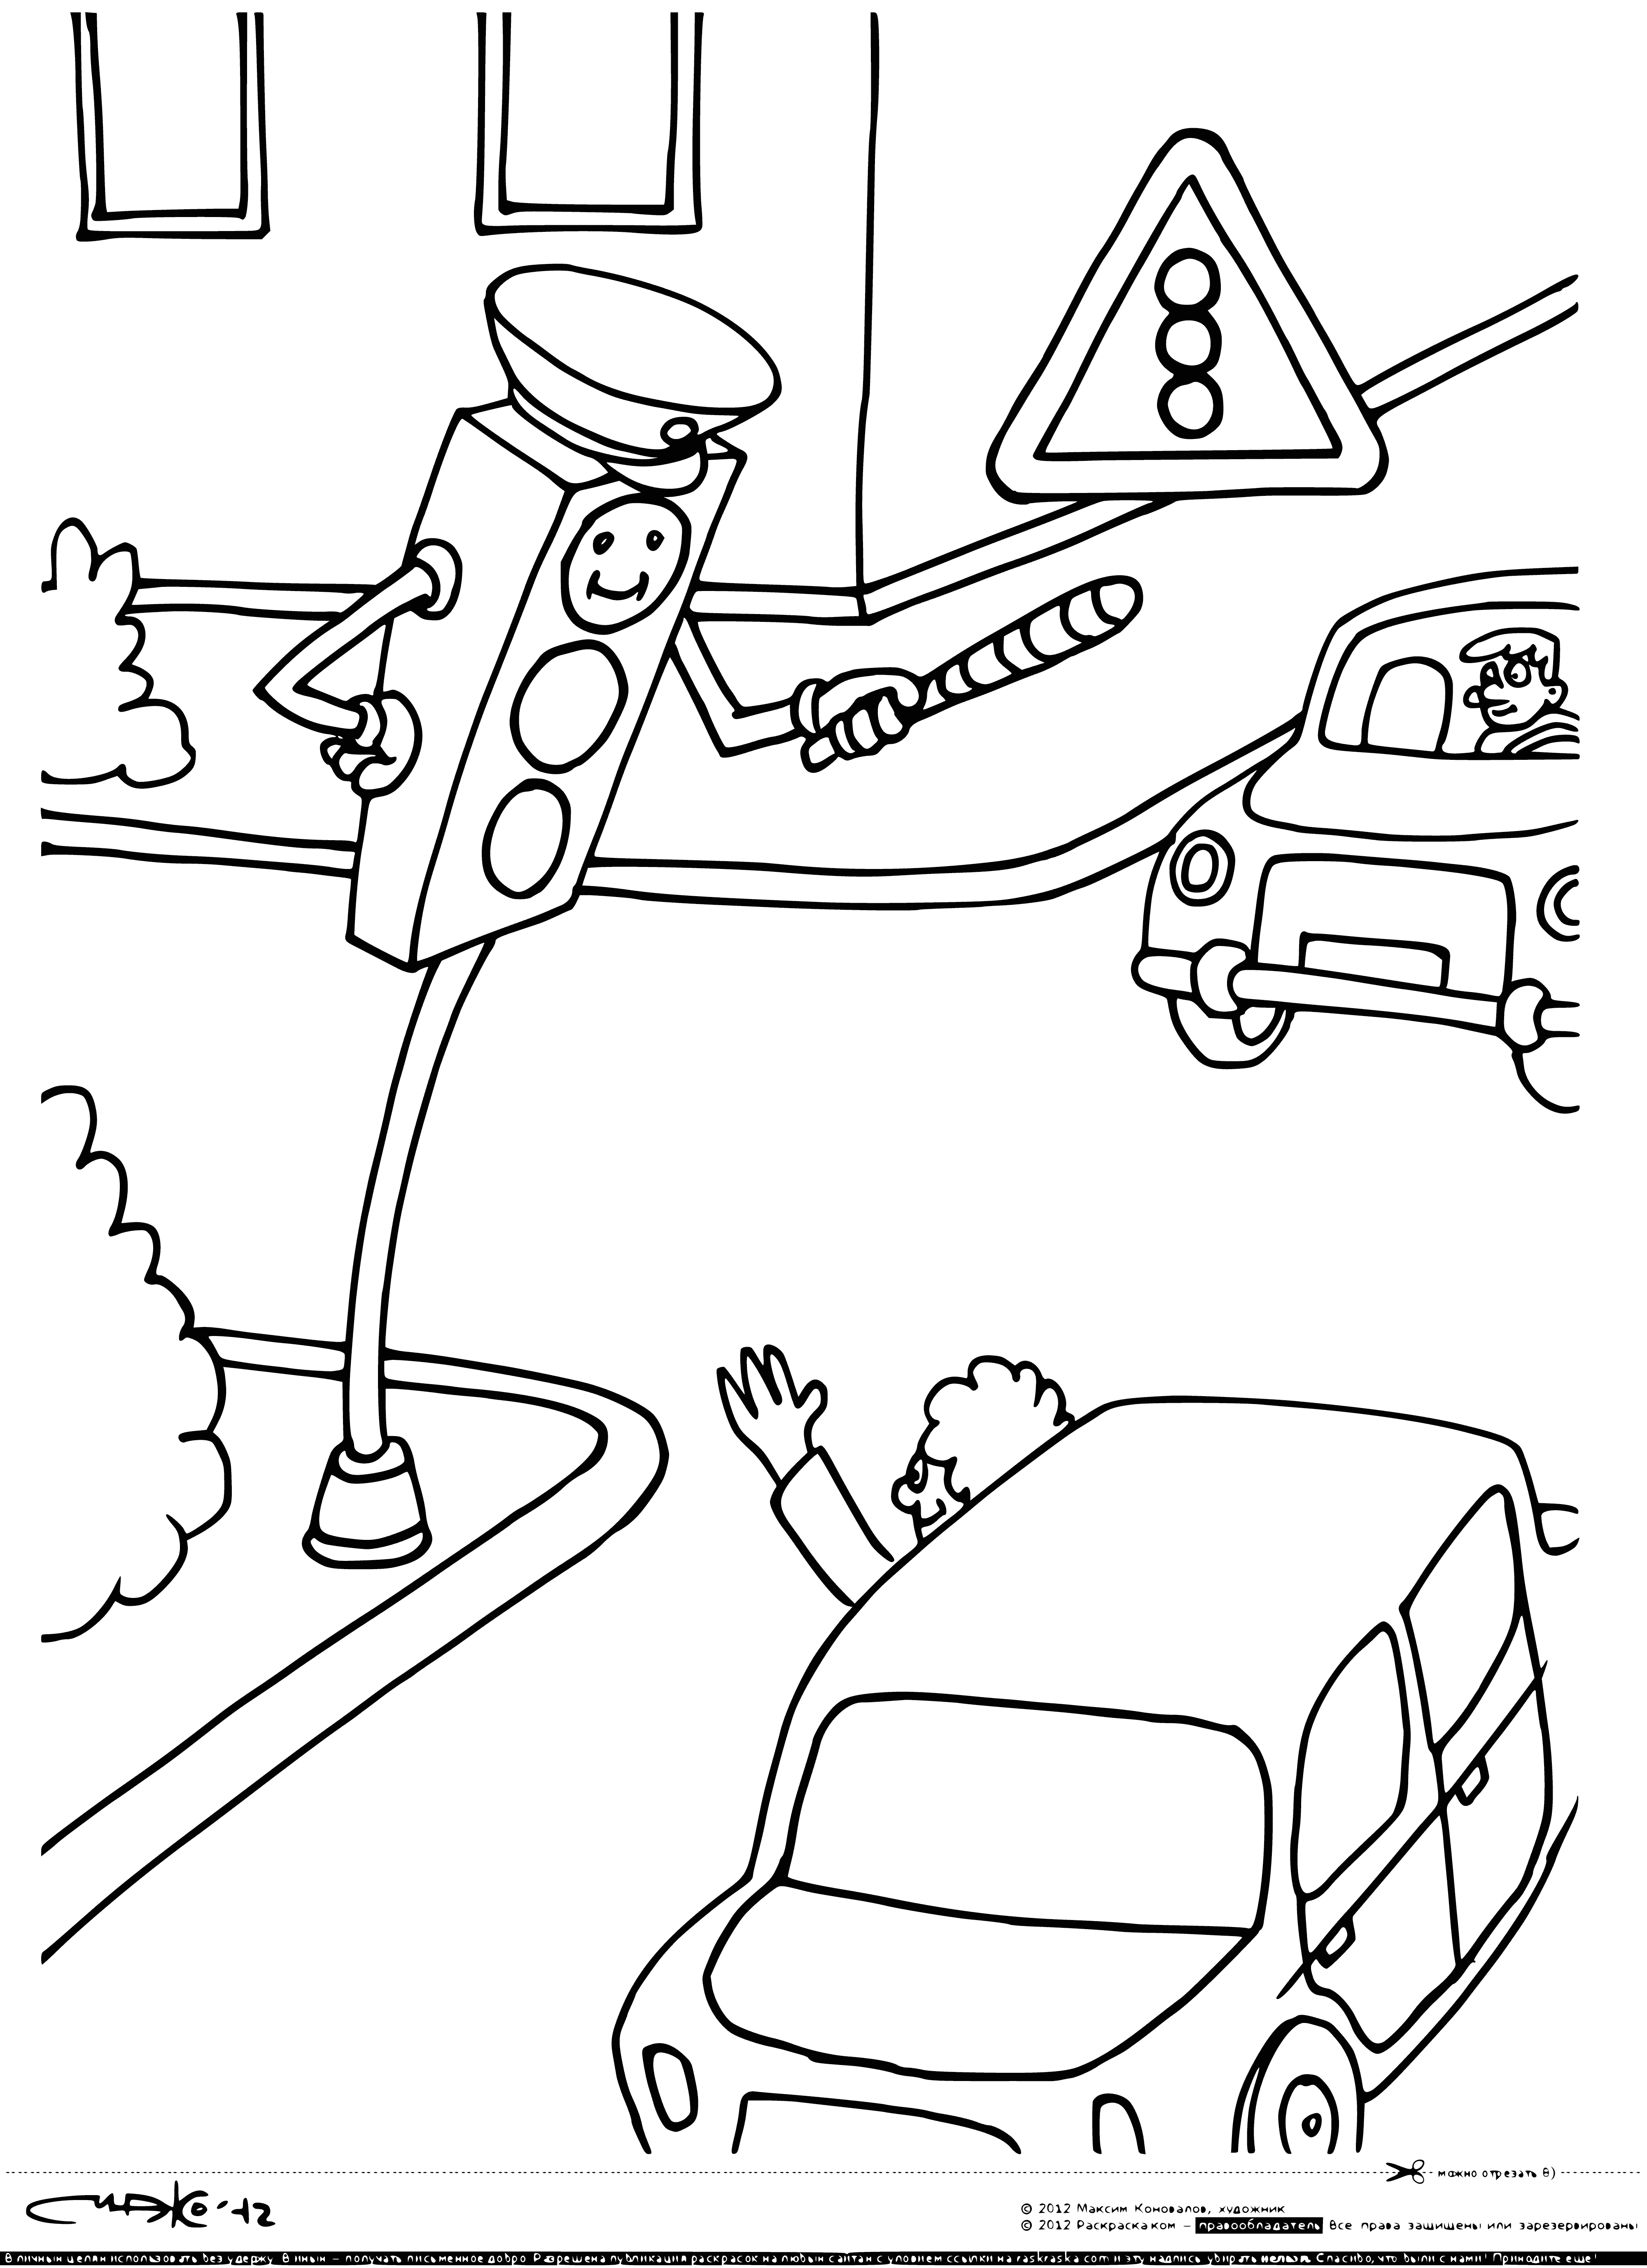 coloring page: 3 traffic signs: stop, yield & traffic light. Stop for stop line, yield for oncoming, green for go.